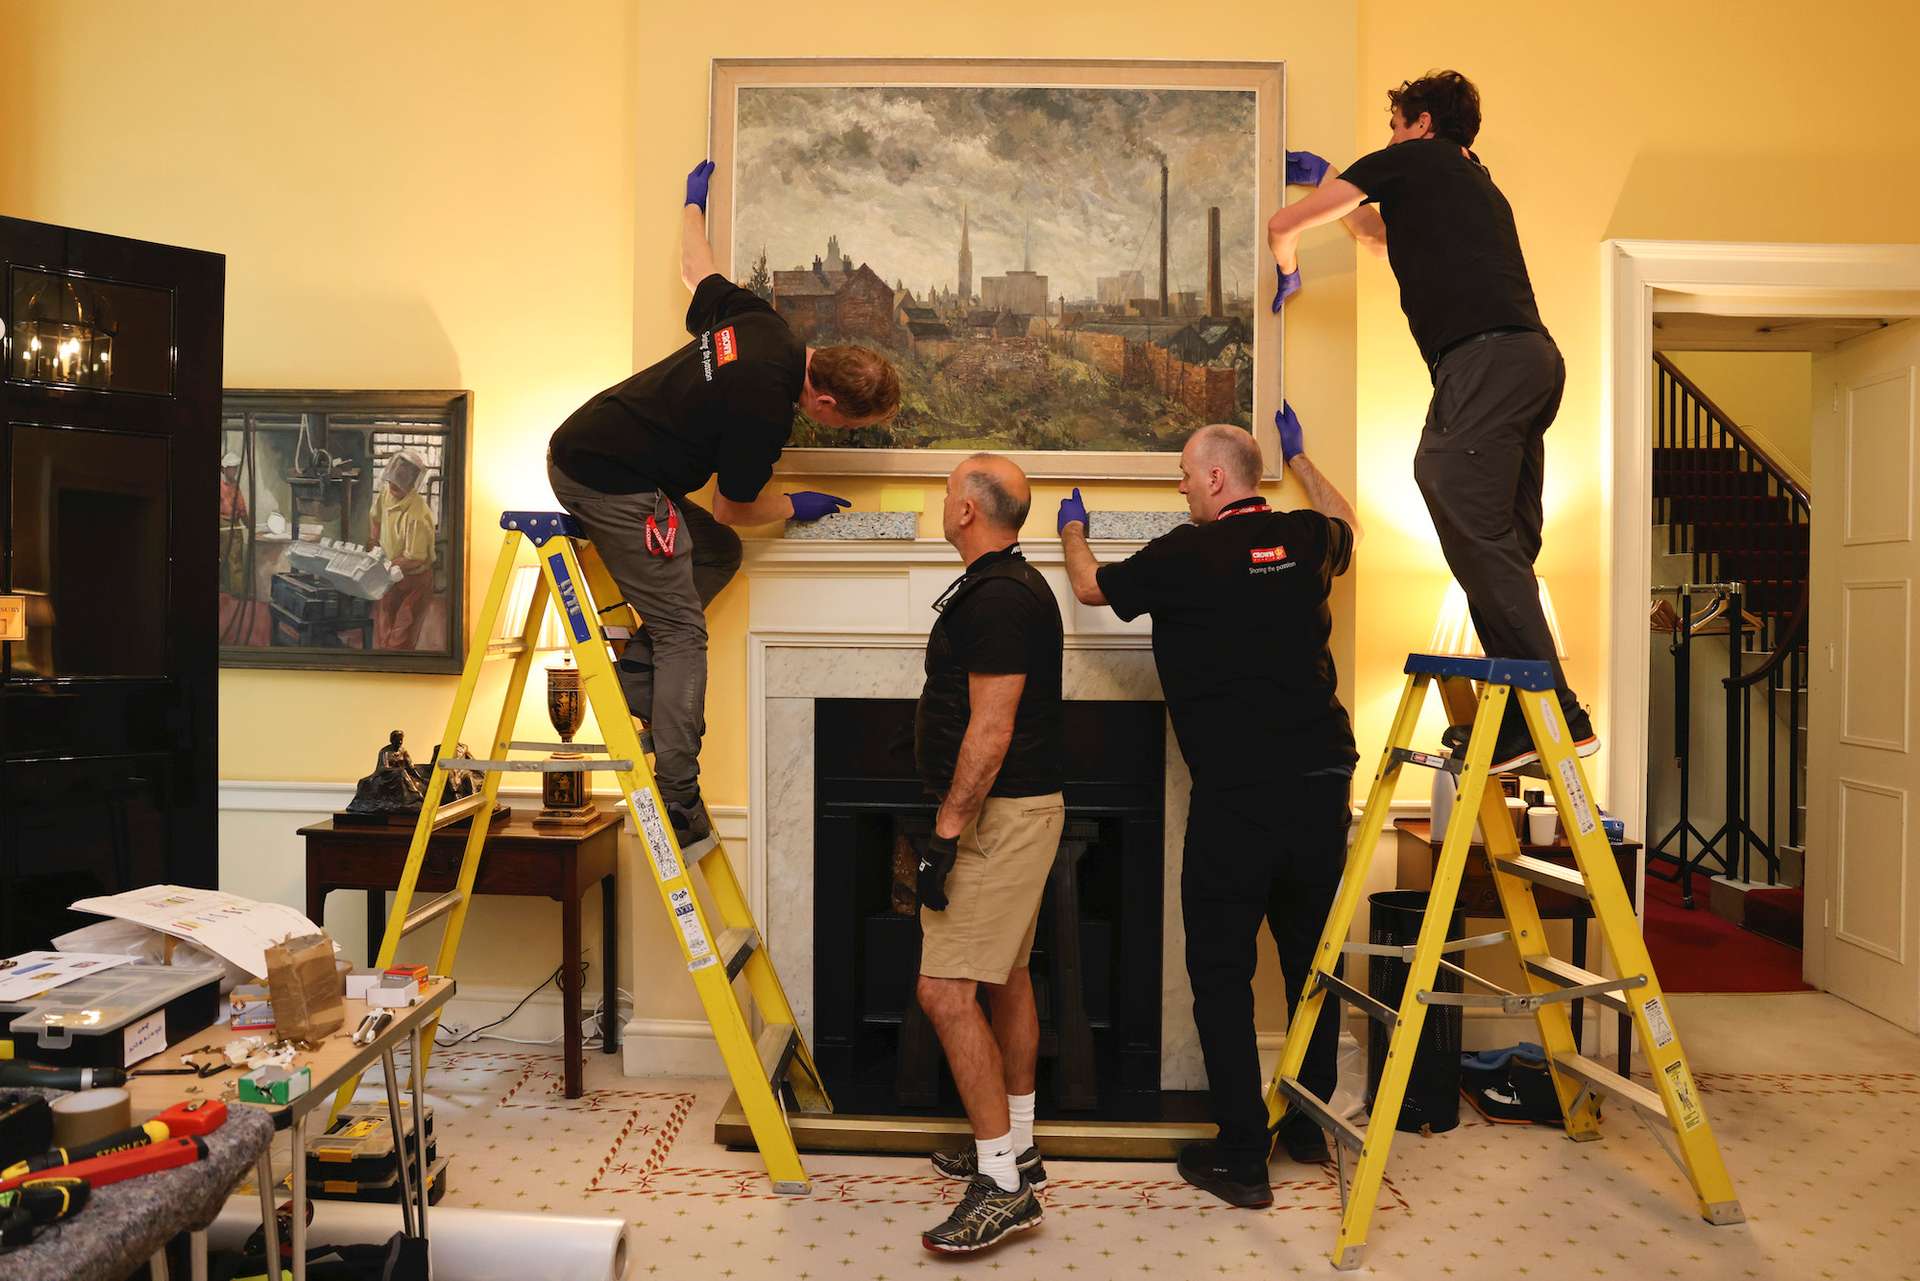 Installation image of a painting being hung up on a wall inside Downing Street